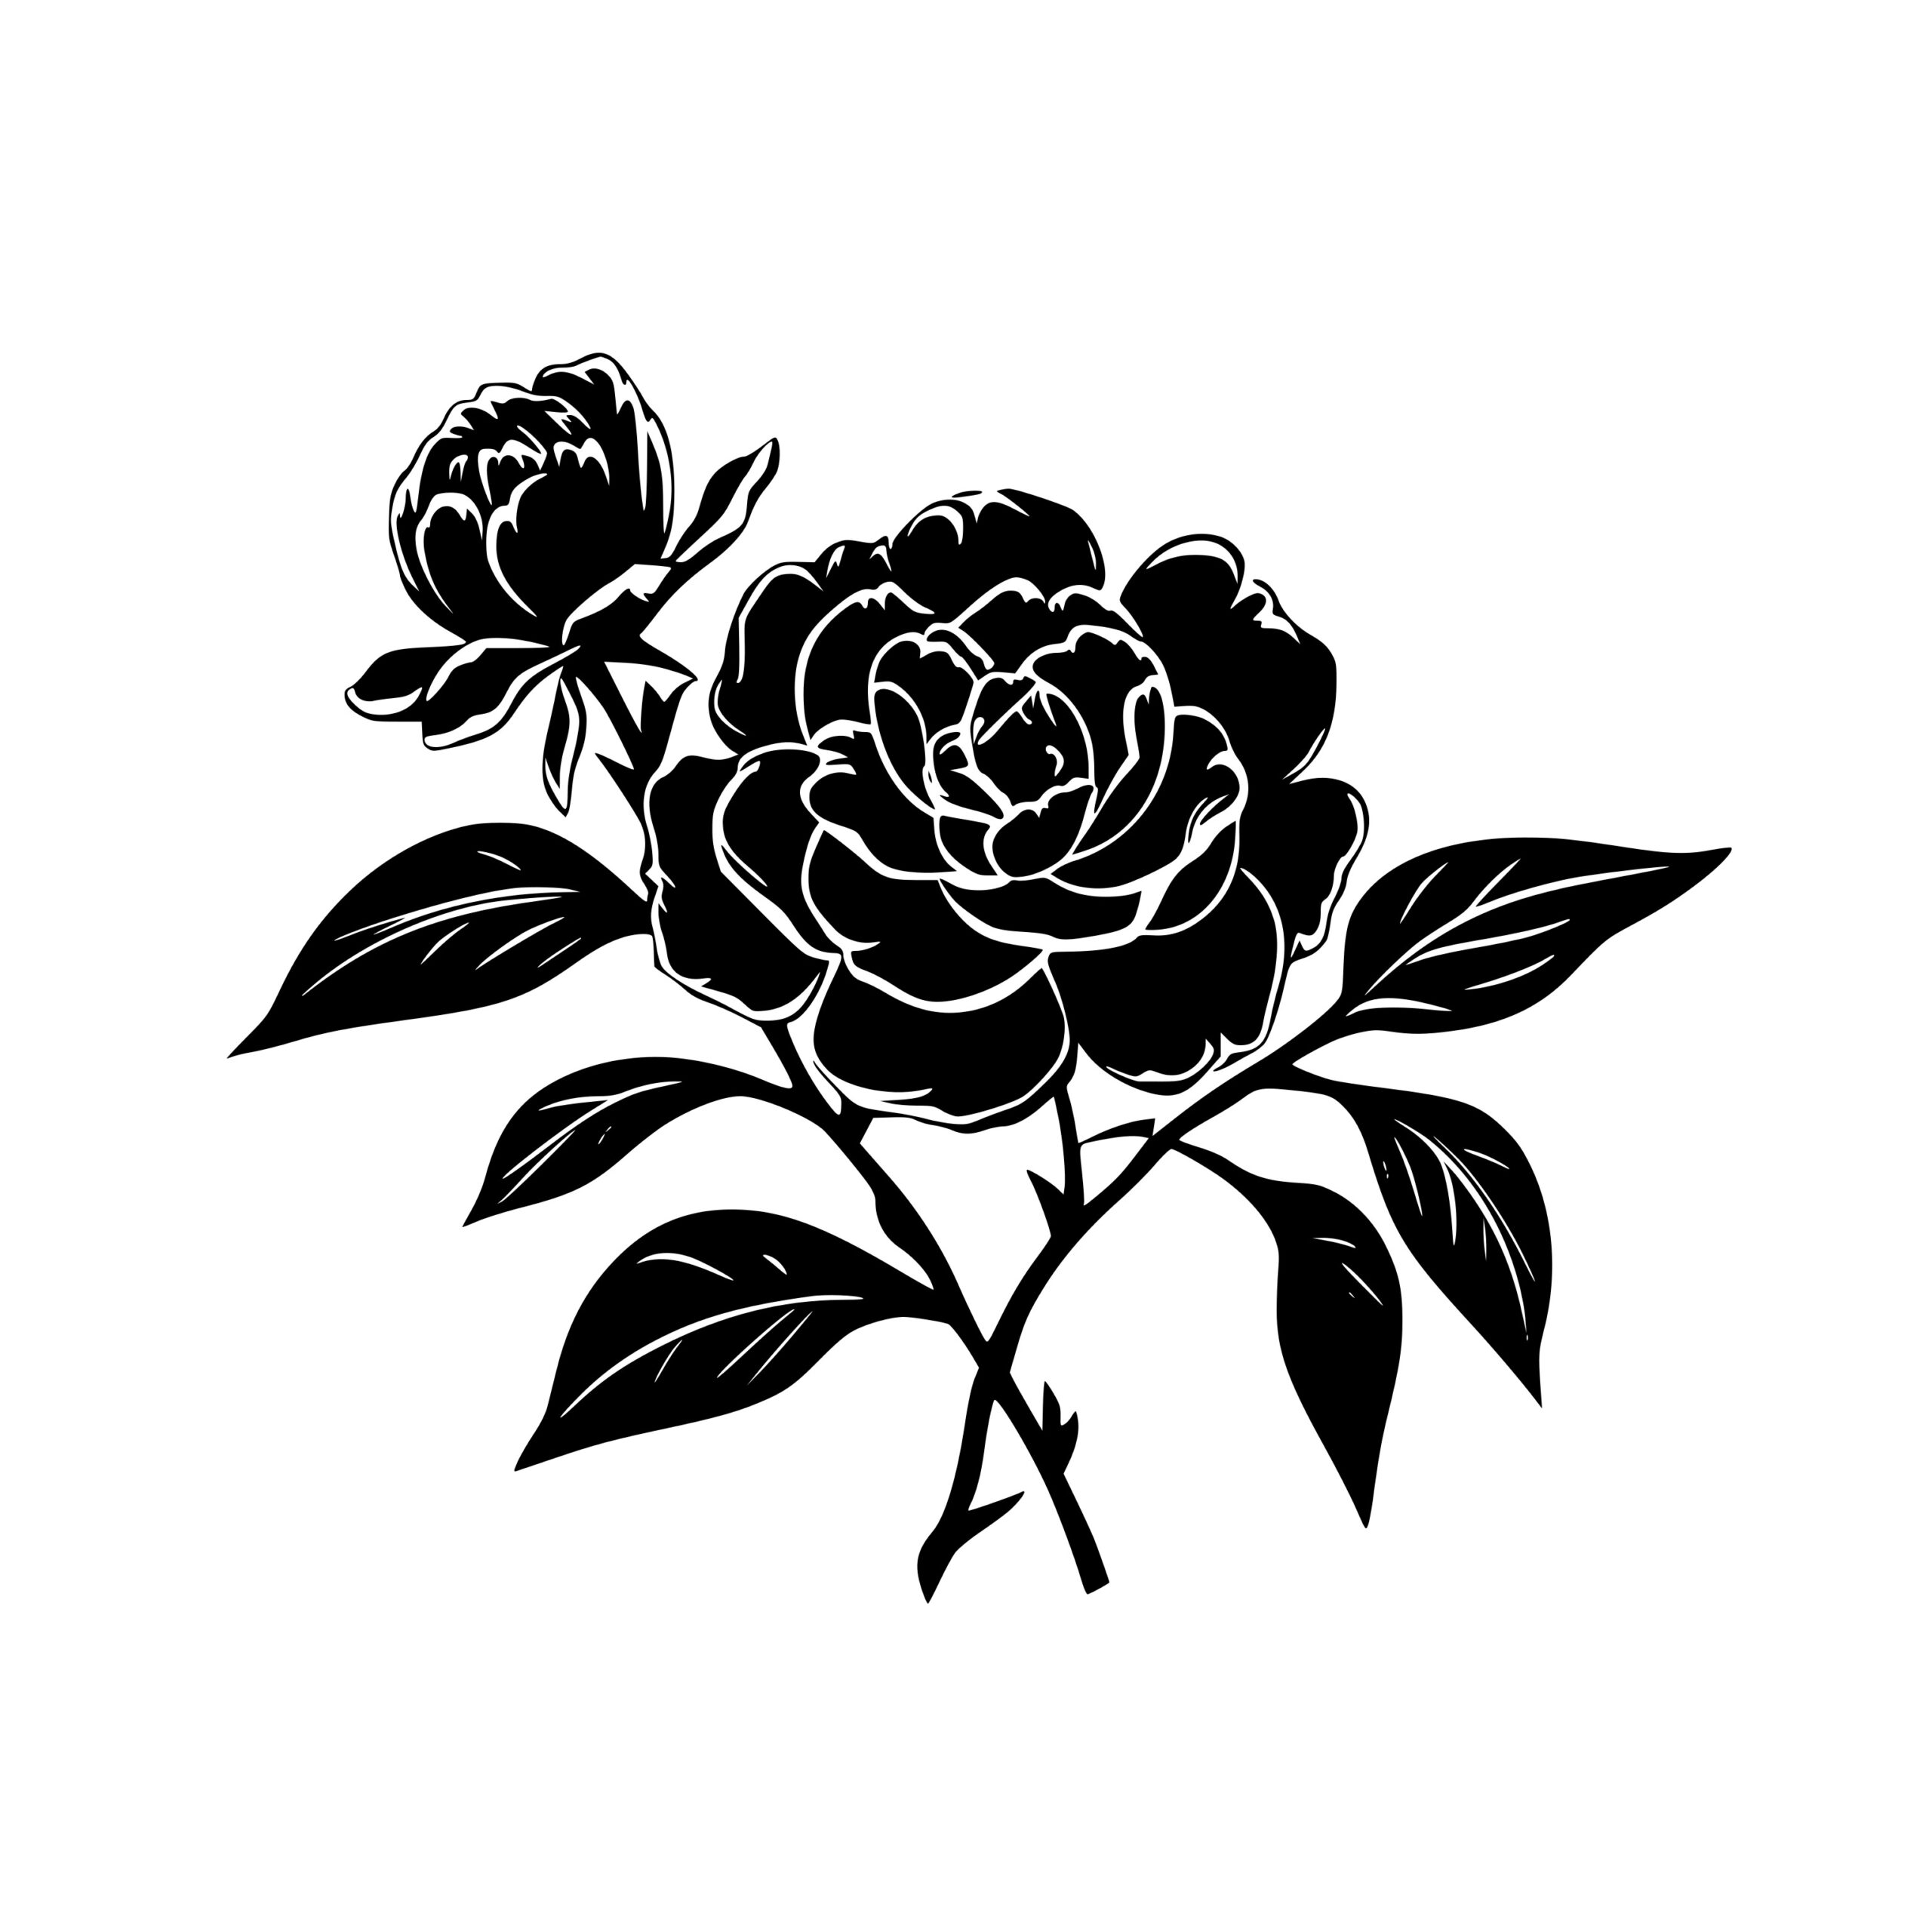 Instant Download Blooming Camellia Image for Cricut, Silhouette, Laser ...